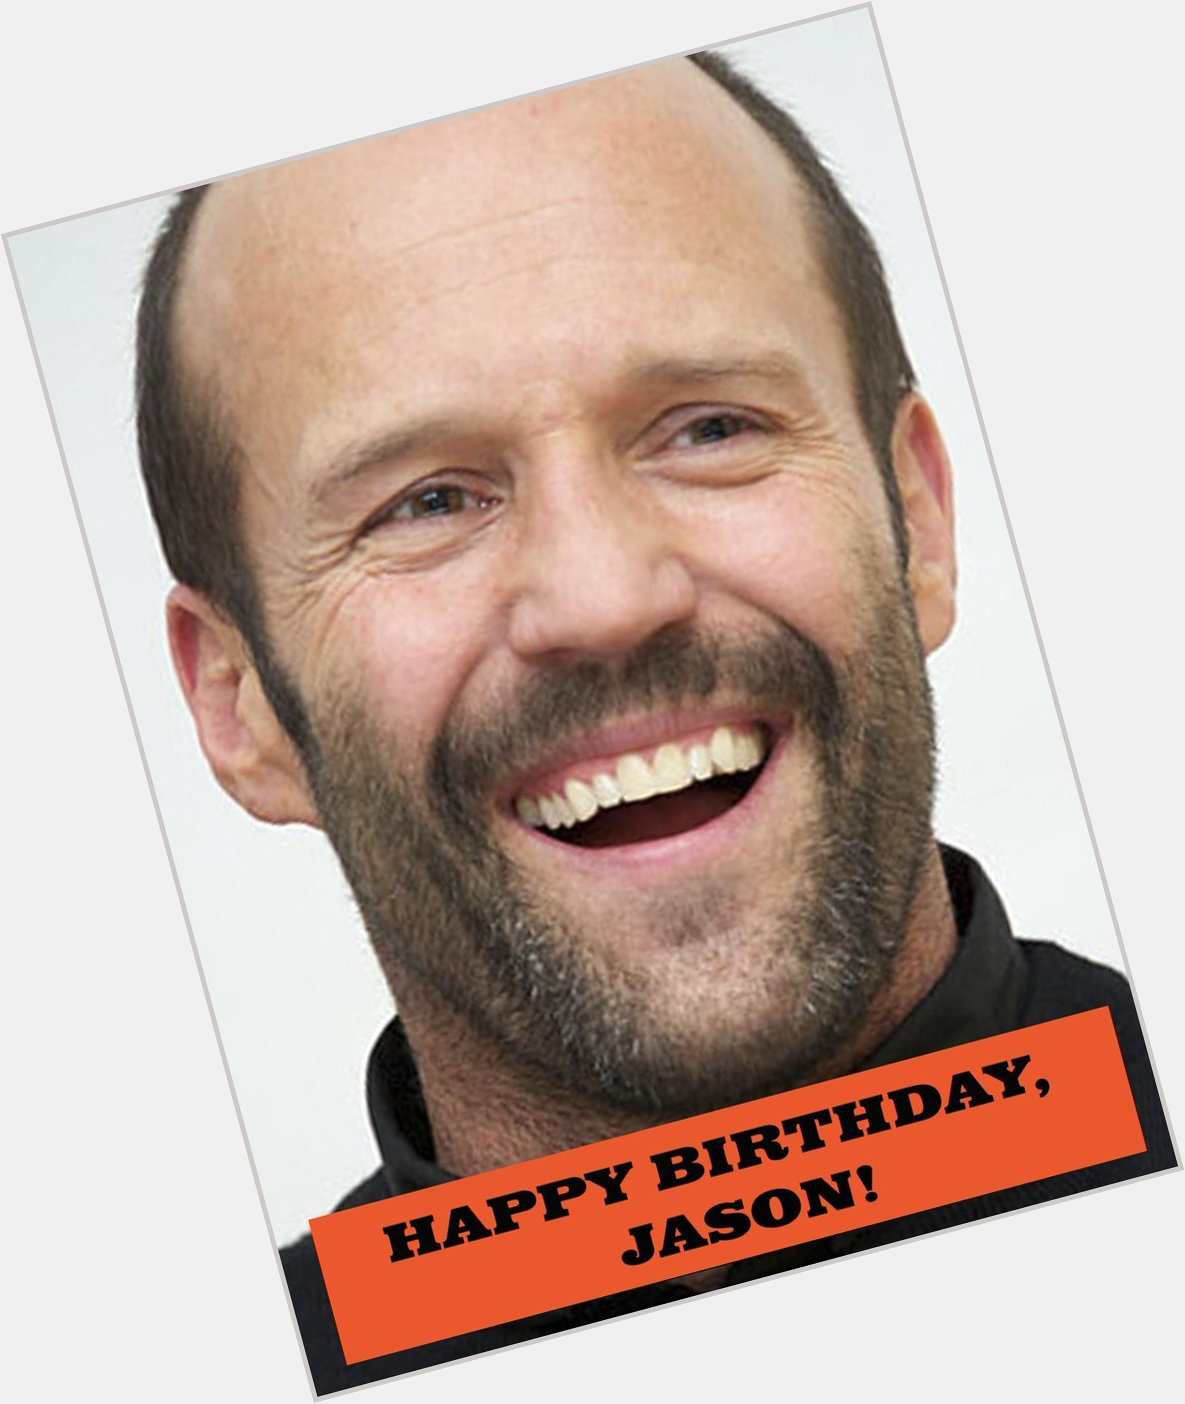 Movie Loft wishing a Happy Birthday to one of the biggest action stars out there, Jason Statham! 